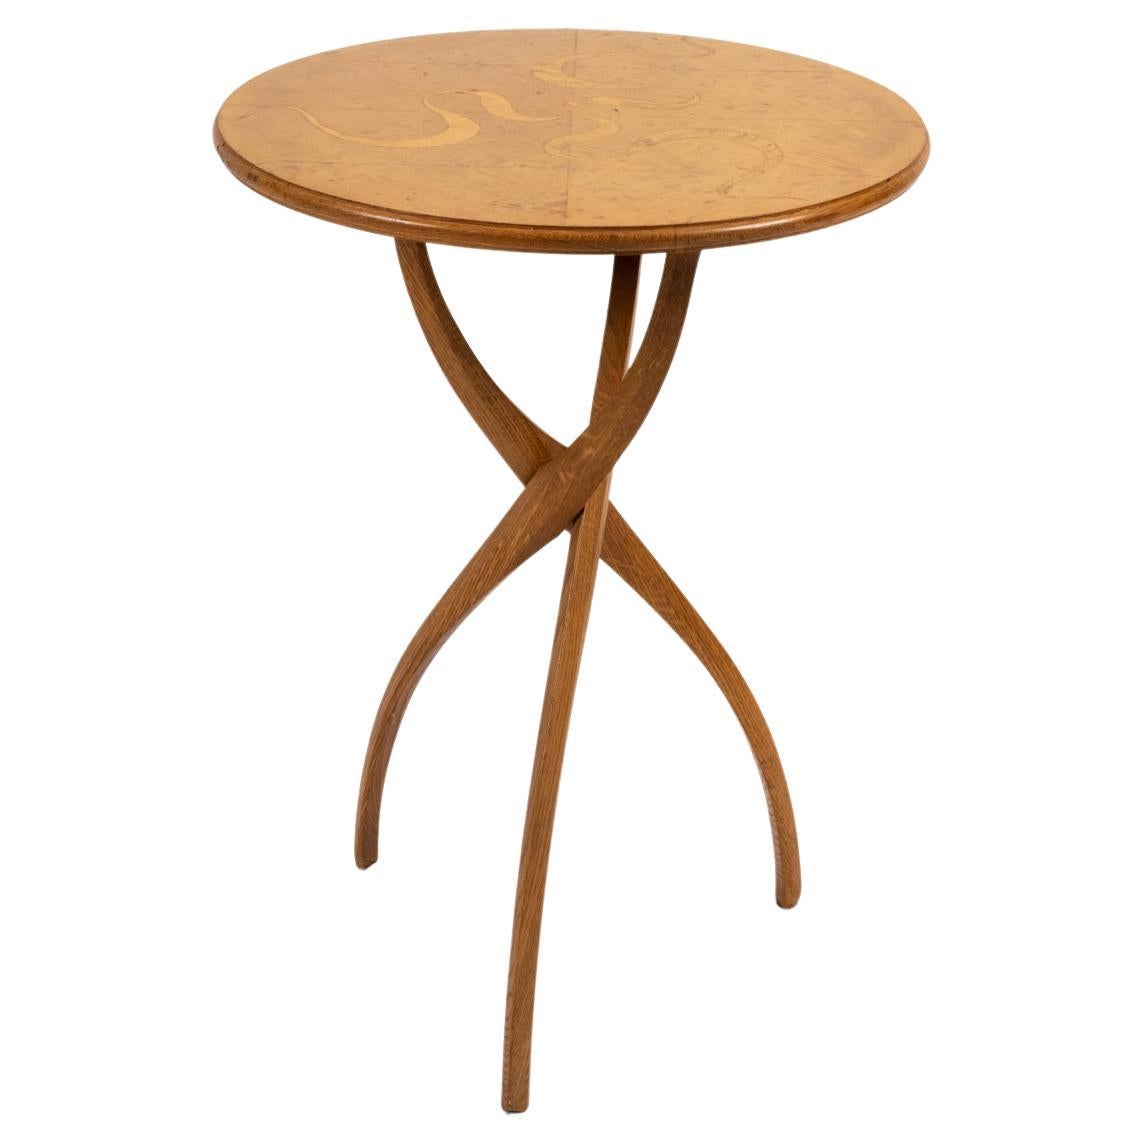 Oscar Tusquets for Carlos Jane "Vortice" Side Table, 1989 For Sale